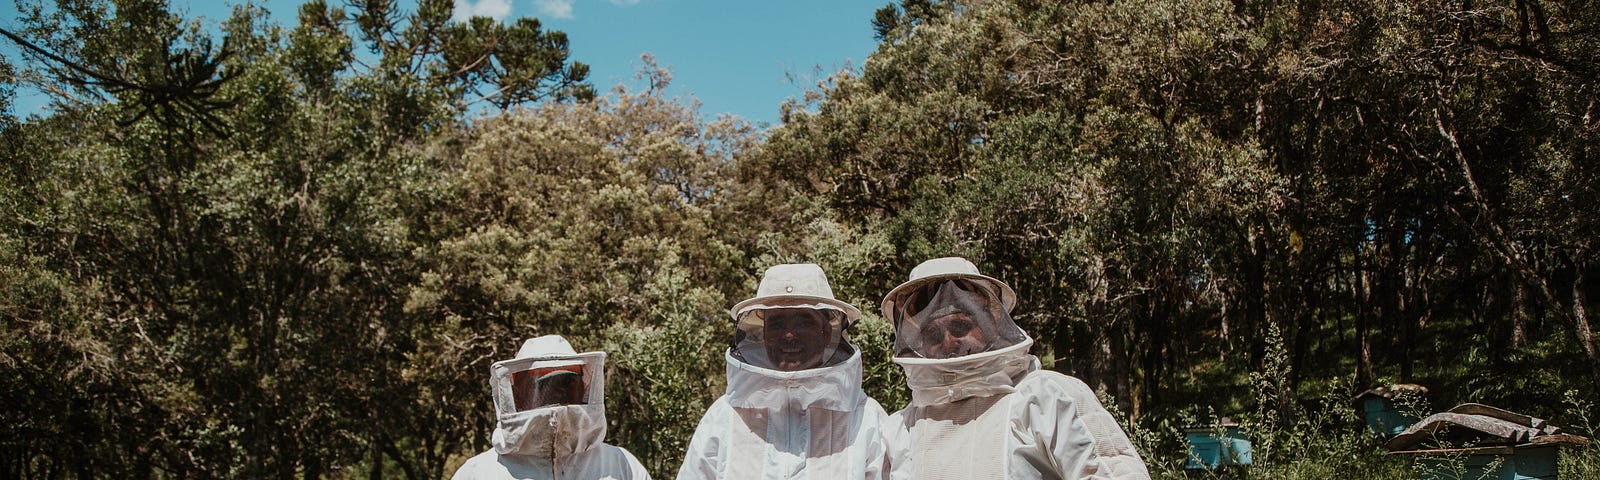 Three beekeepers in full uniform with hoods stand with a box of bees outside.